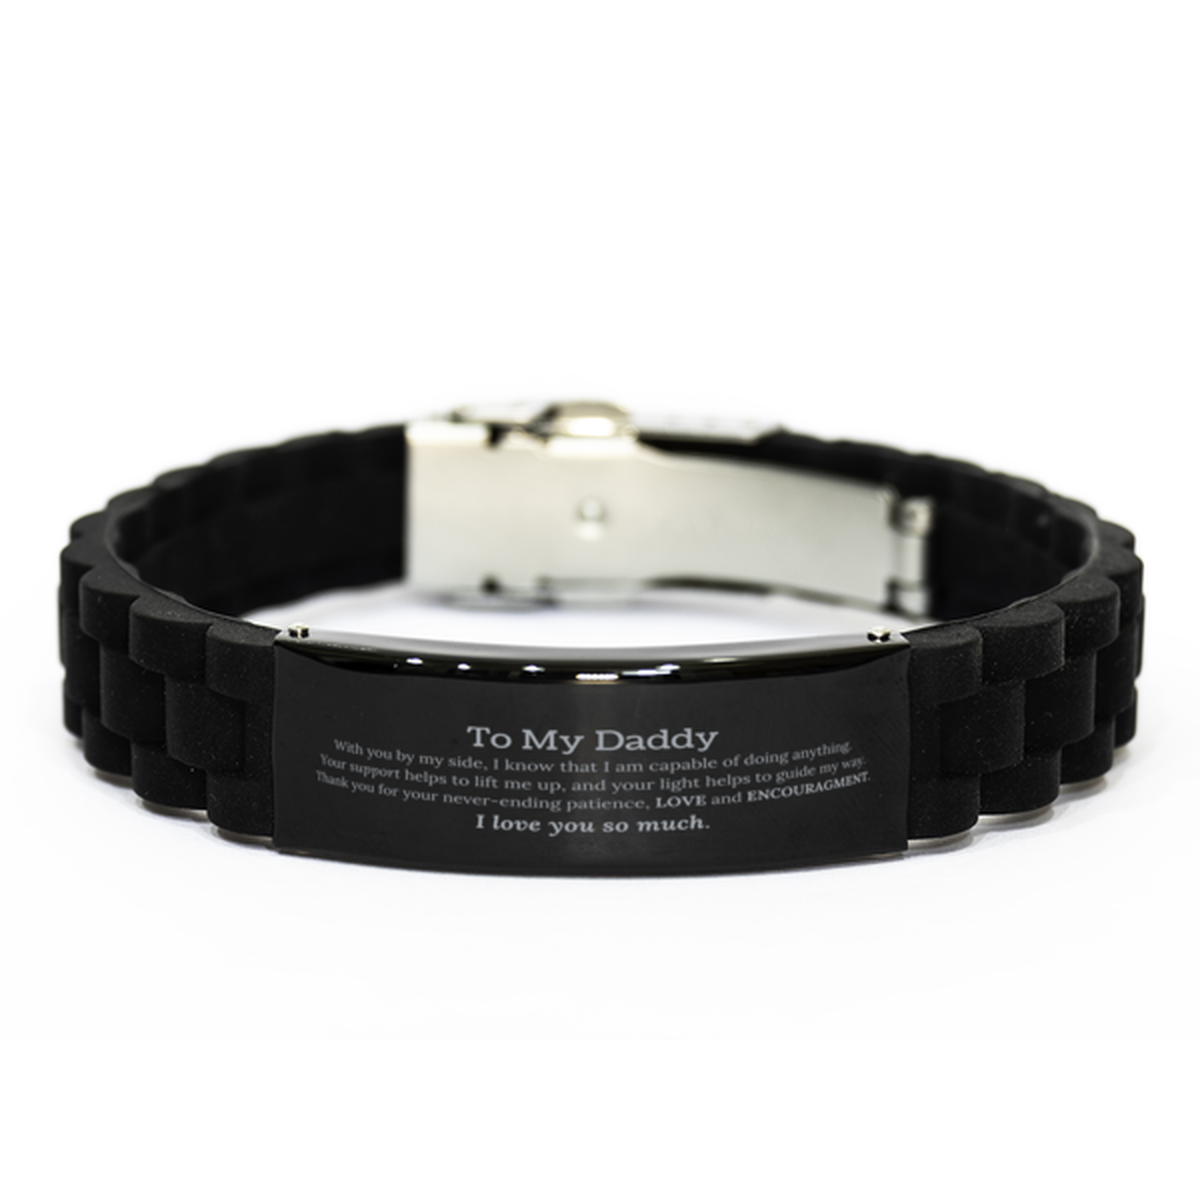 Appreciation Daddy Black Glidelock Clasp Bracelet Gifts, To My Daddy Birthday Christmas Wedding Keepsake Gifts for Daddy With you by my side, I know that I am capable of doing anything. I love you so much